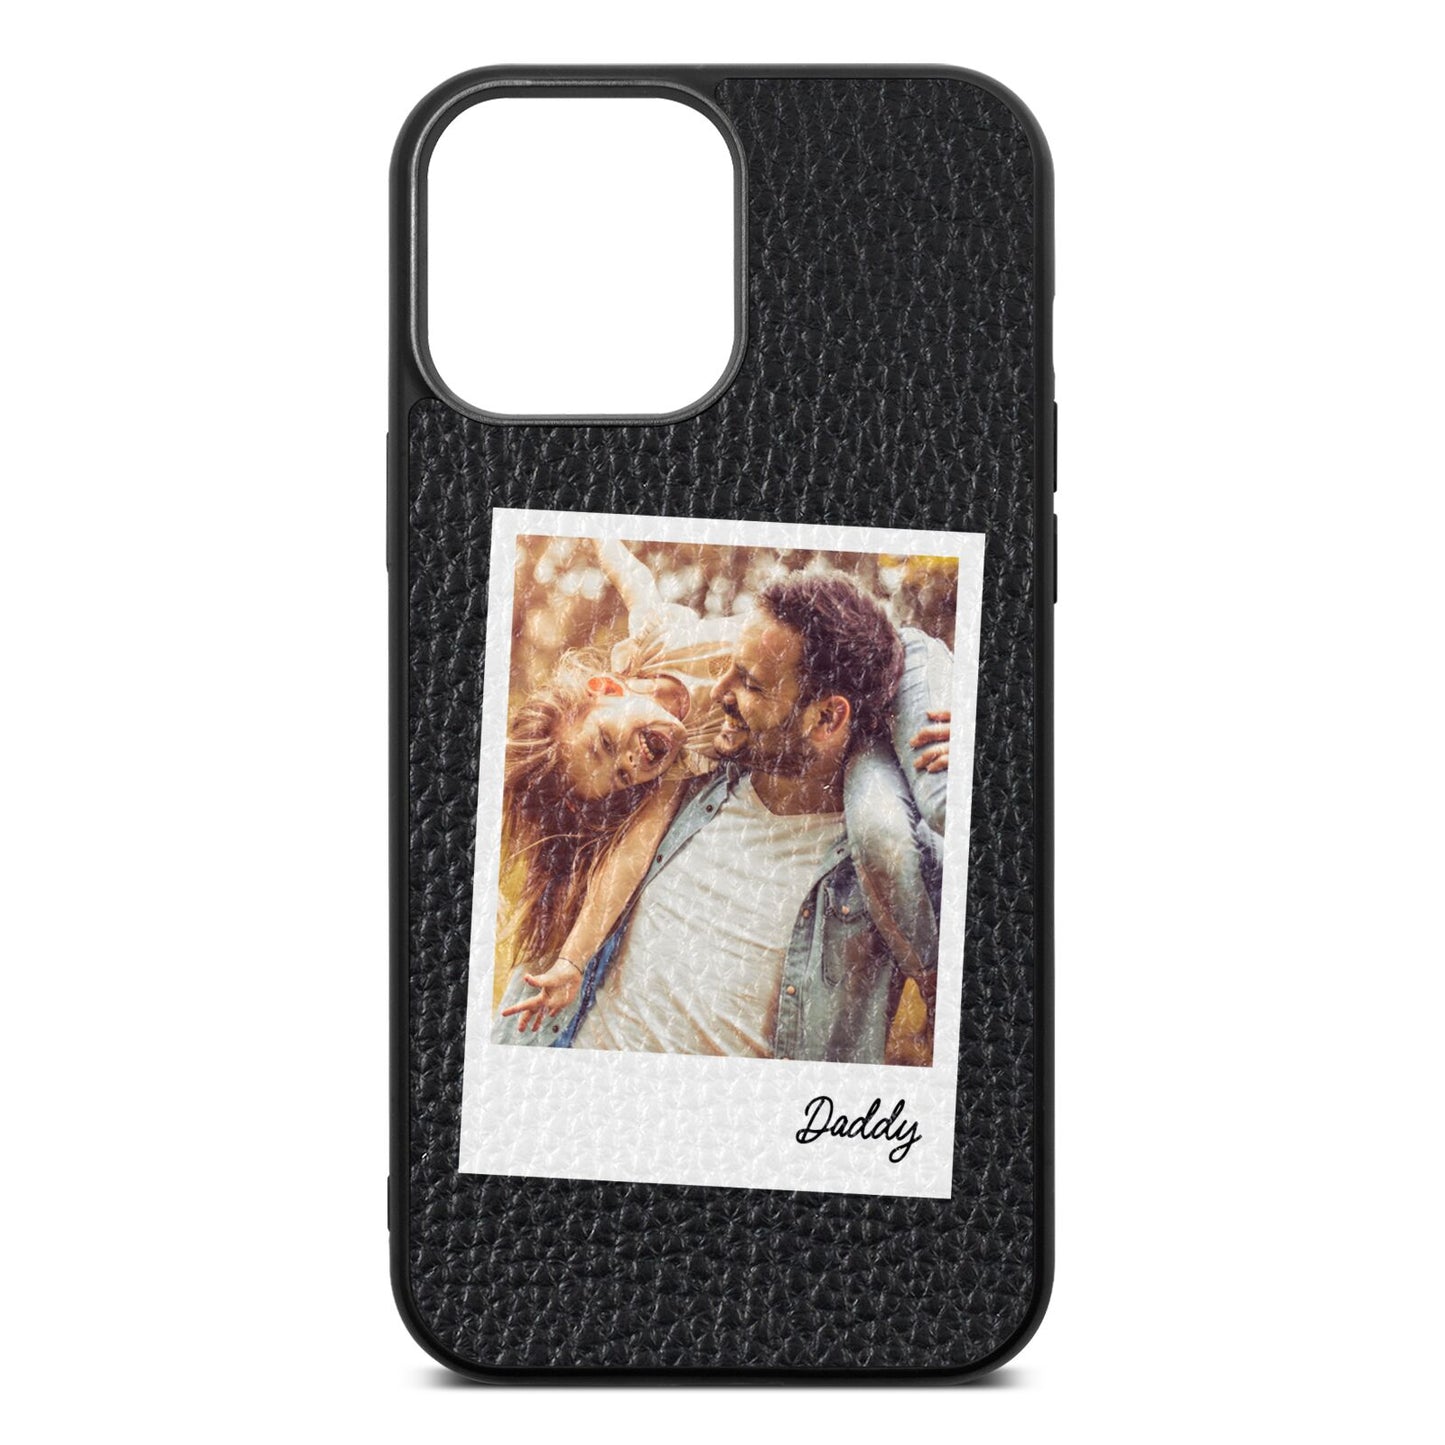 Fathers Day Photo Black Pebble Leather iPhone 13 Pro Max Case